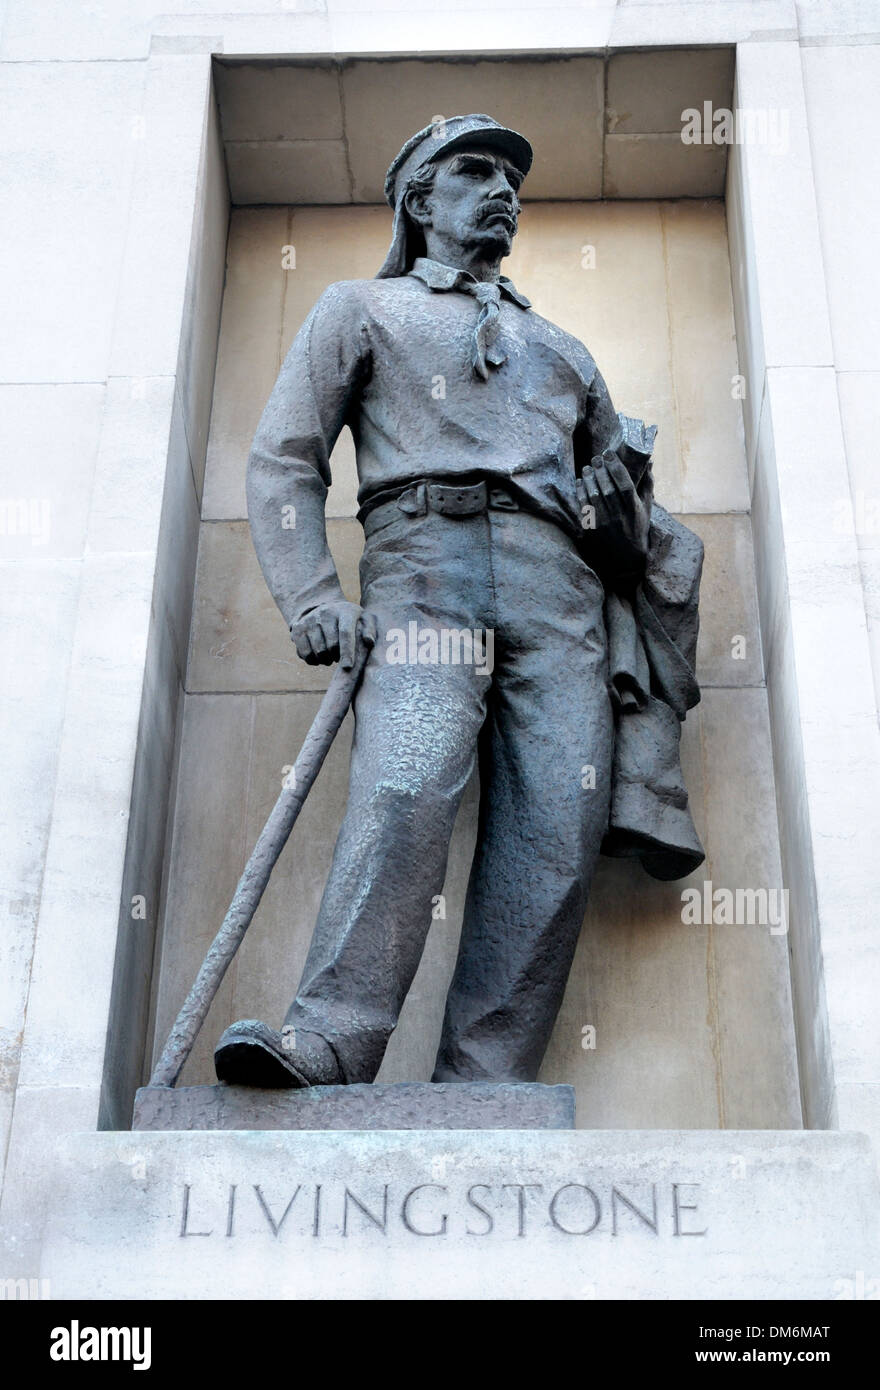 London, England, UK. Statue: David Livingstone (1813-73; missionary and explorer) Royal Geographical Society in Kensington Gore Stock Photo